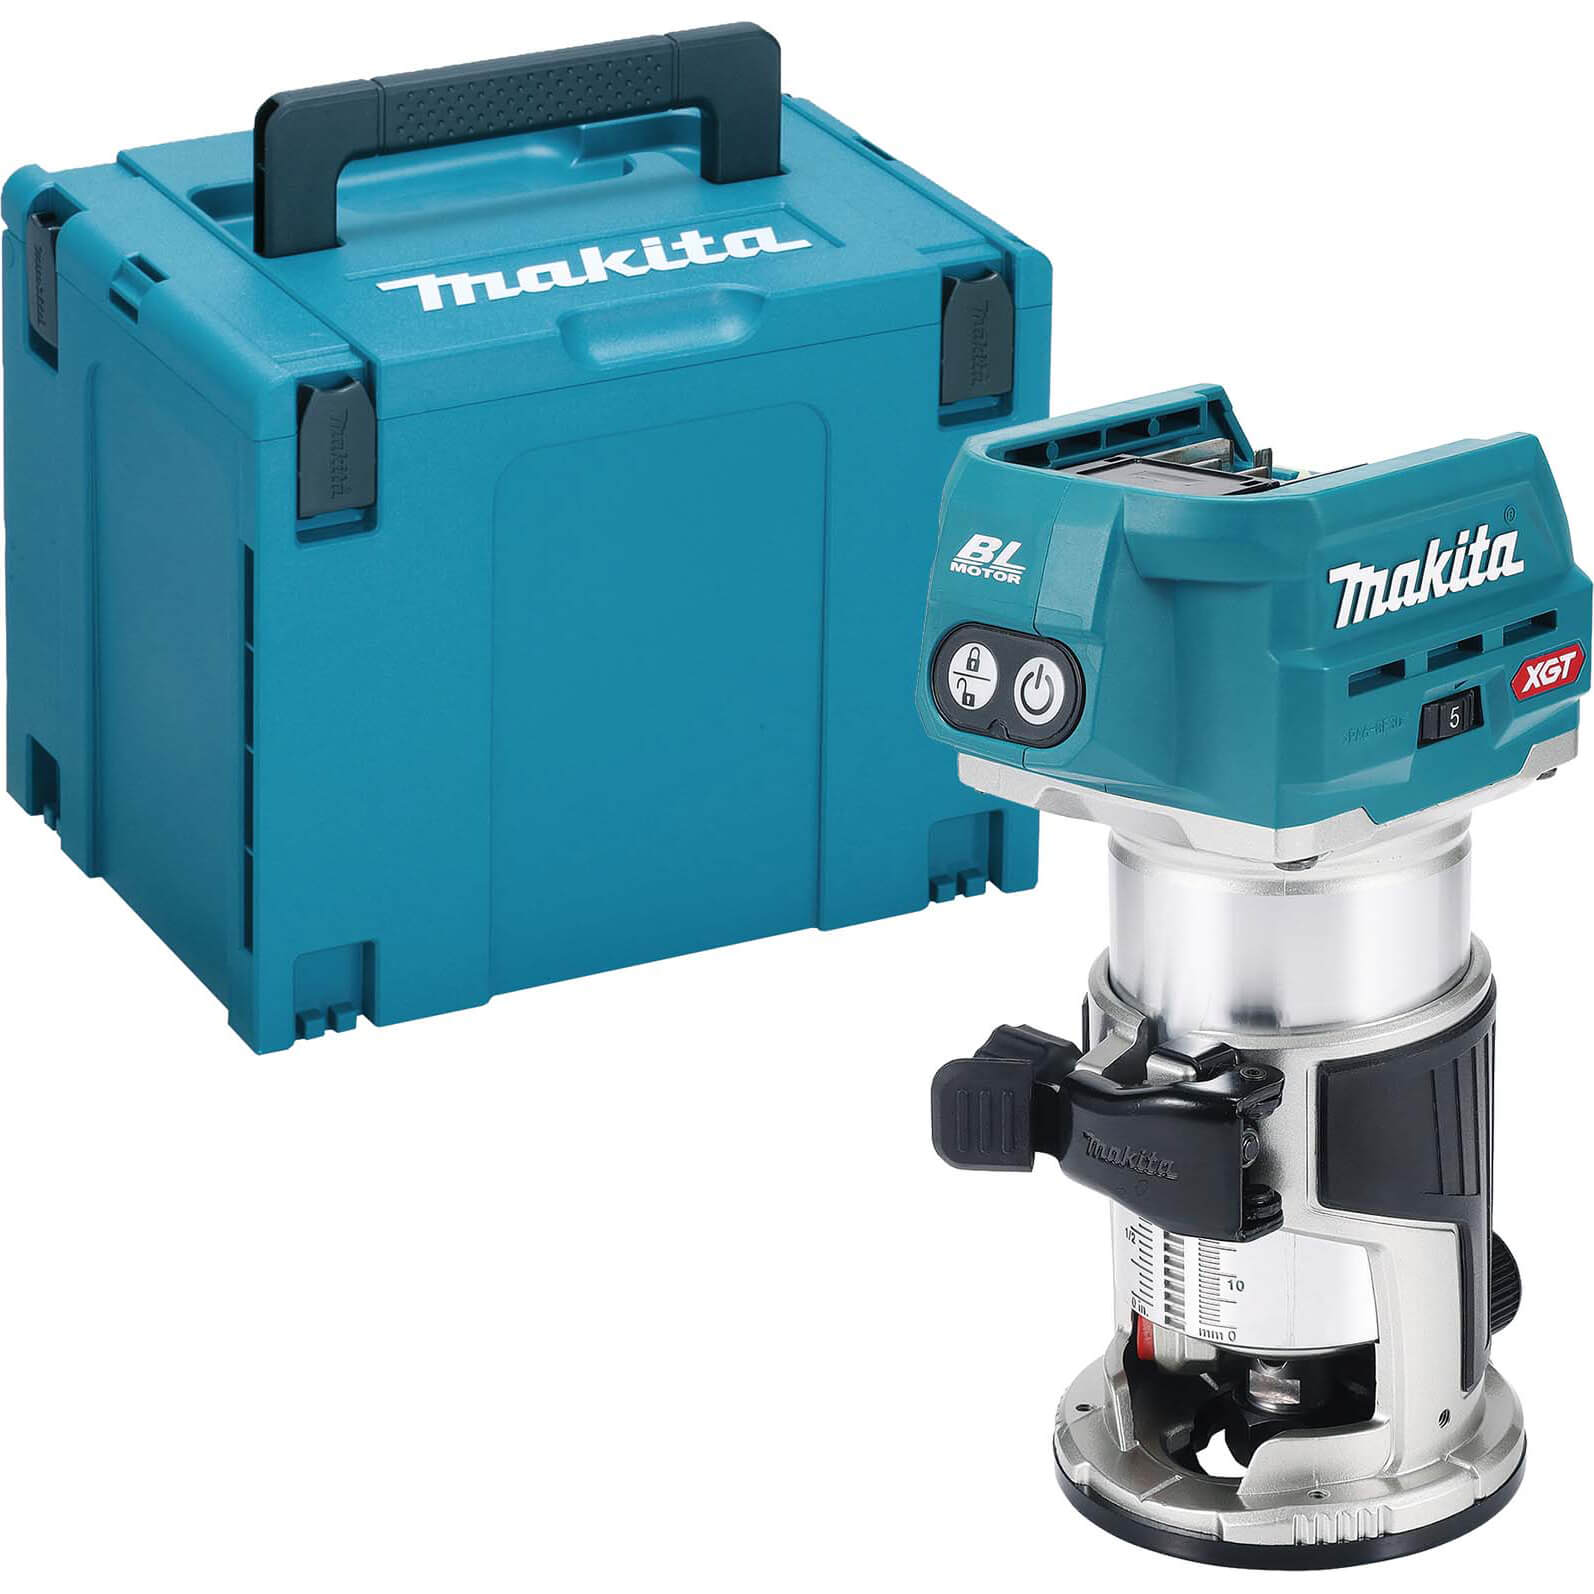 Makita RT001G 40v Max XGT Cordless Brushless 1/4" Trim Router No Batteries No Charger Case & Accessories